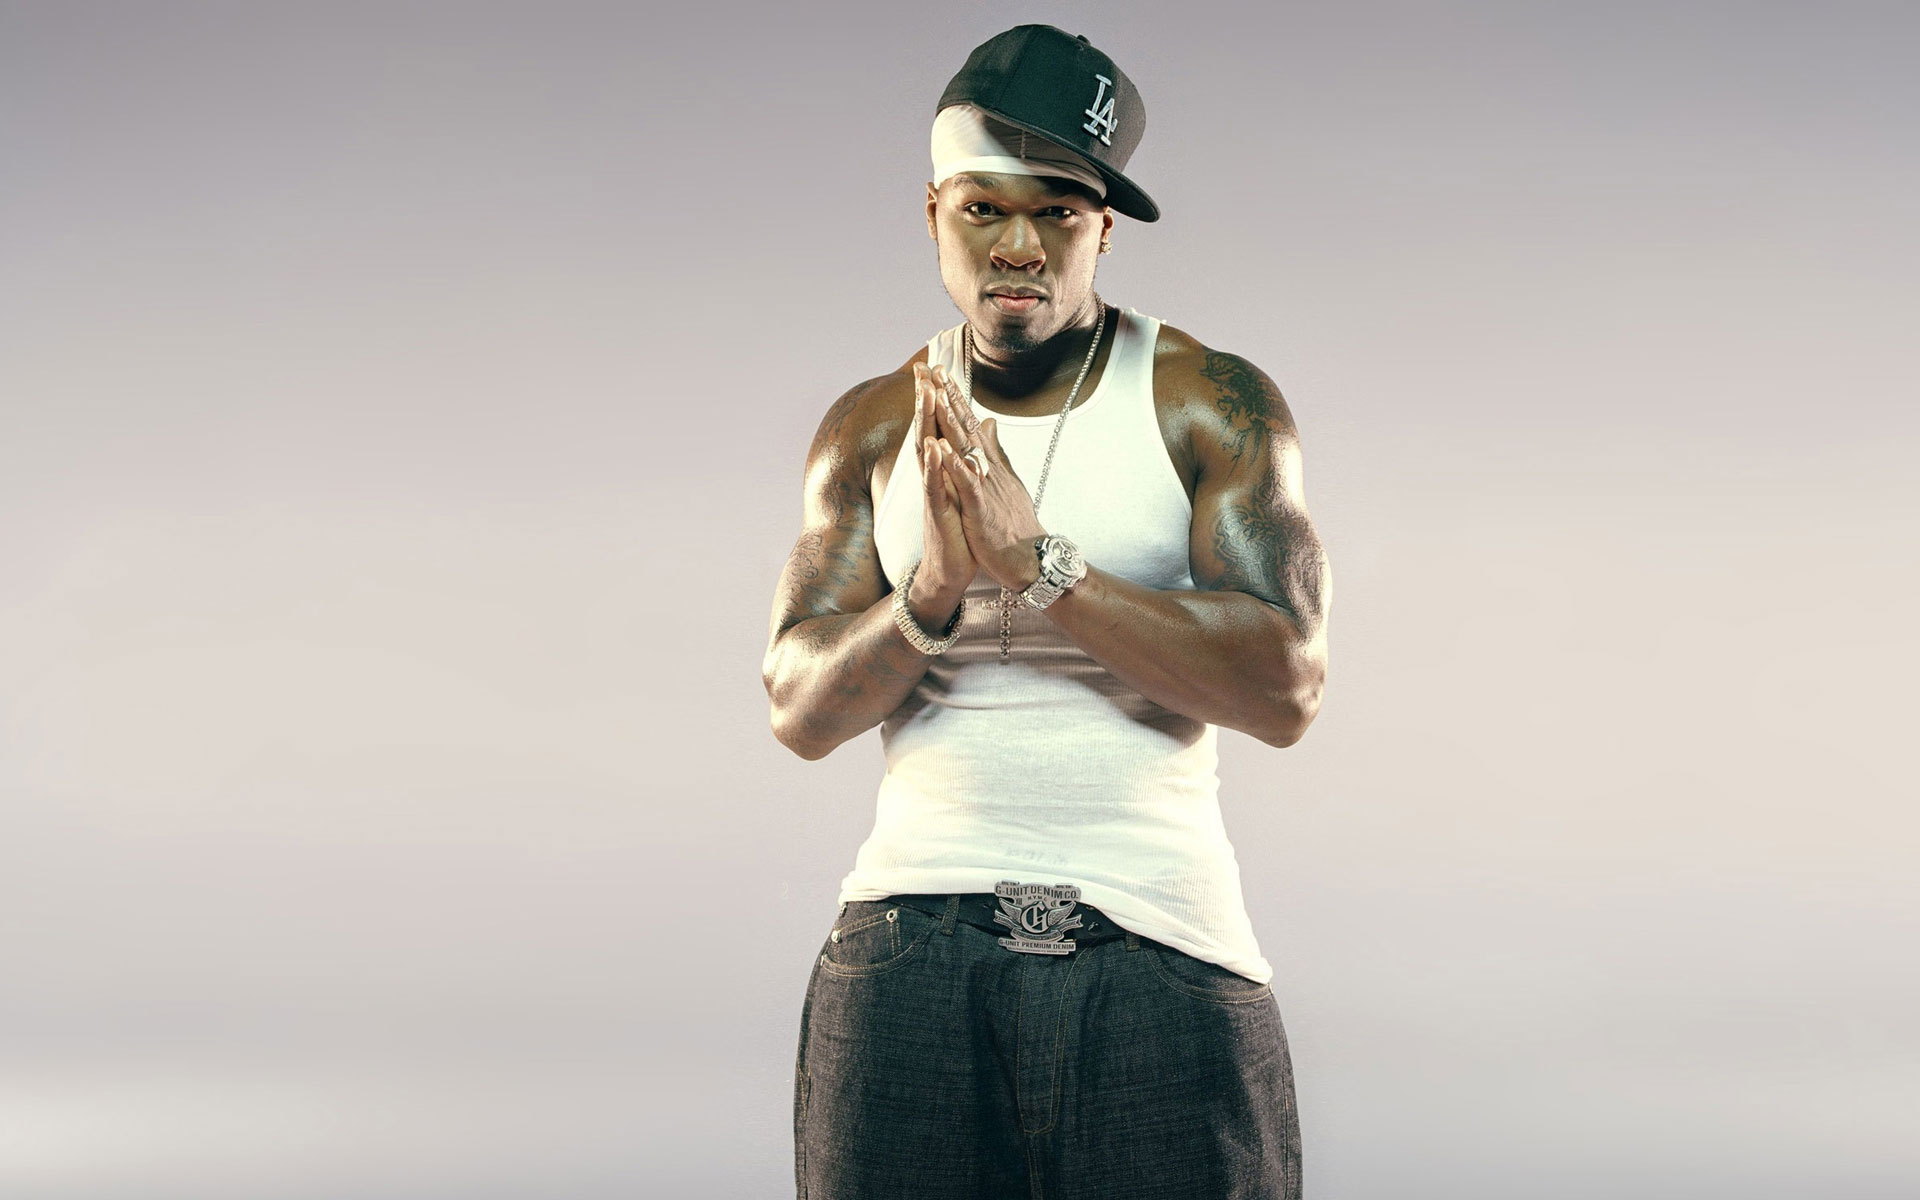 Music 50 Cent HD Wallpaper | Background Image